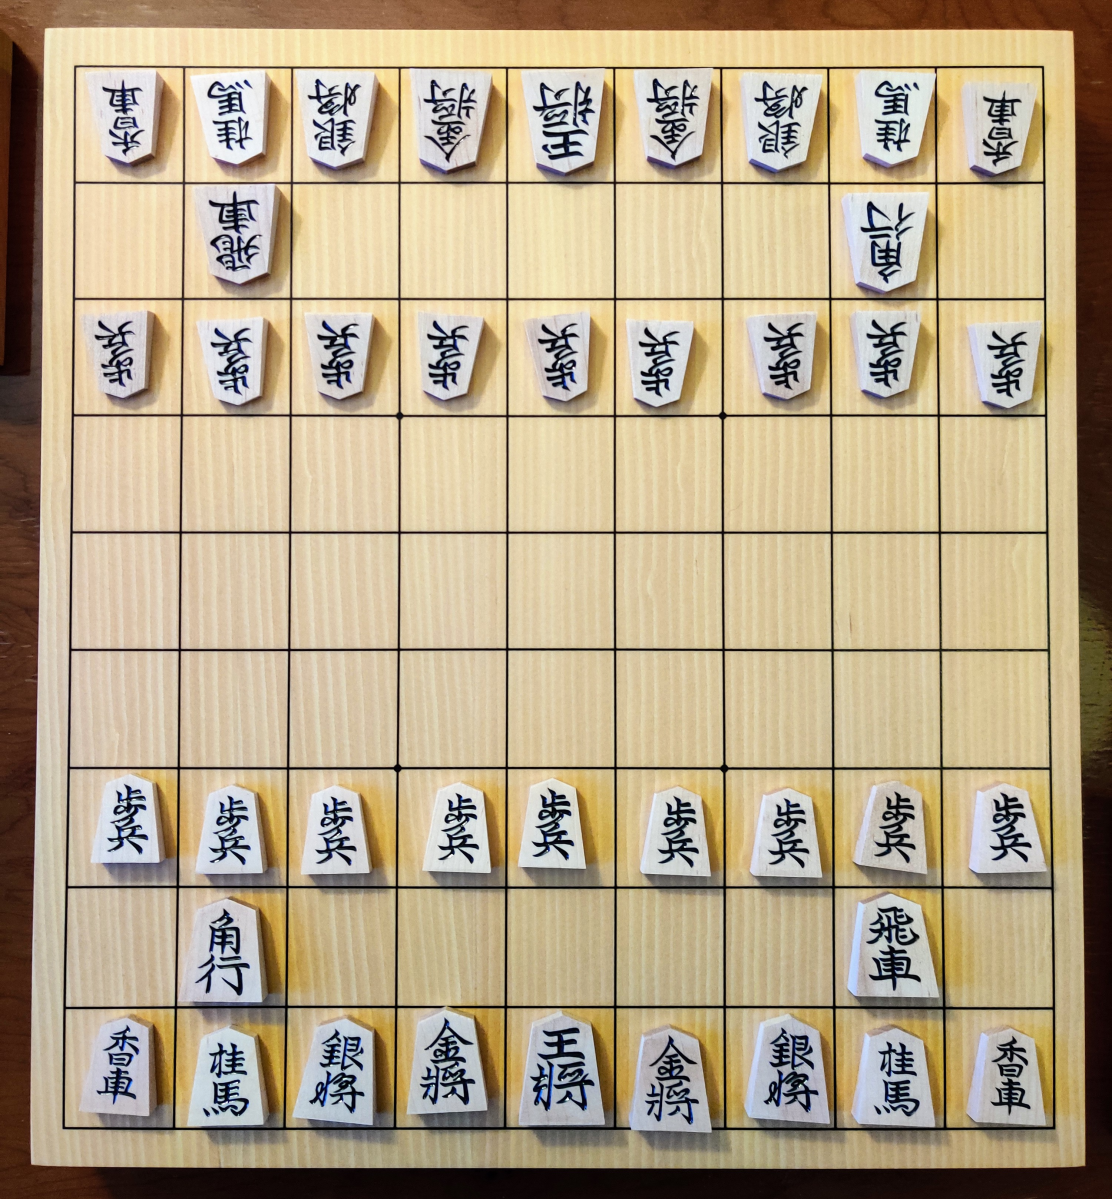 I wanna see shogi (Japanese chess) come into the chess world.. : r